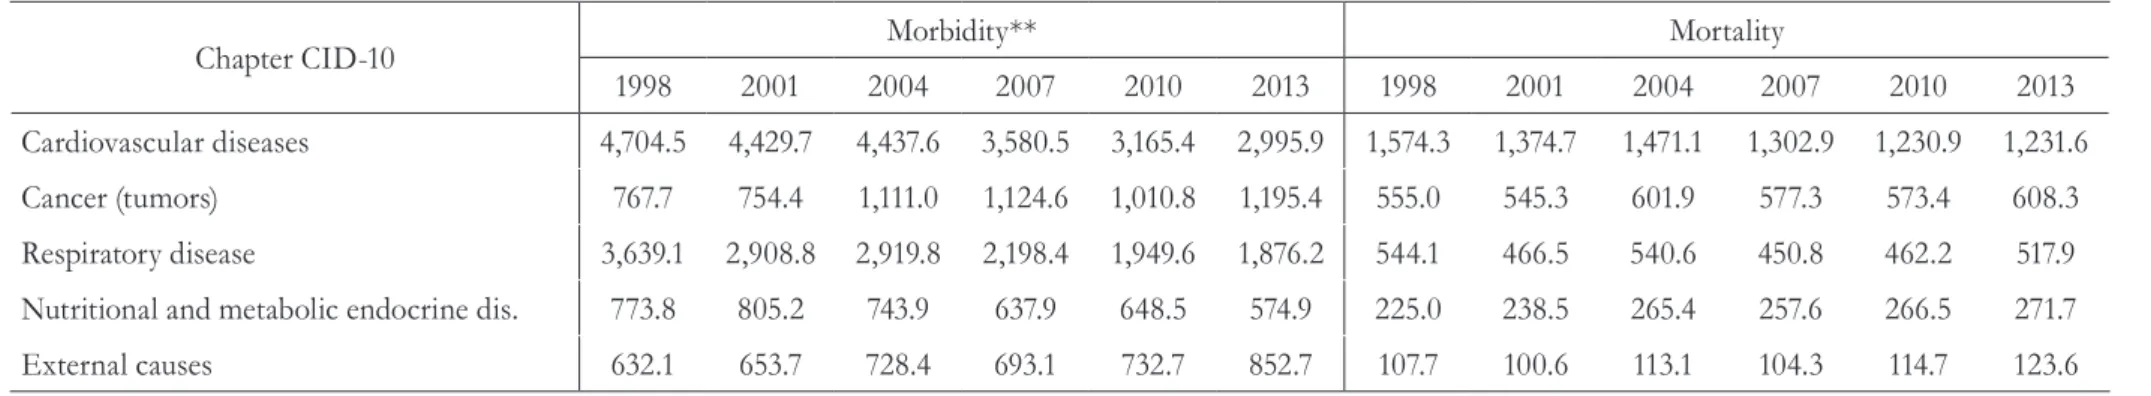 Table 3. Morbidity and mortality rates* of elderly Brazilians according to chapters of the CID-10 between 1998 and 2013